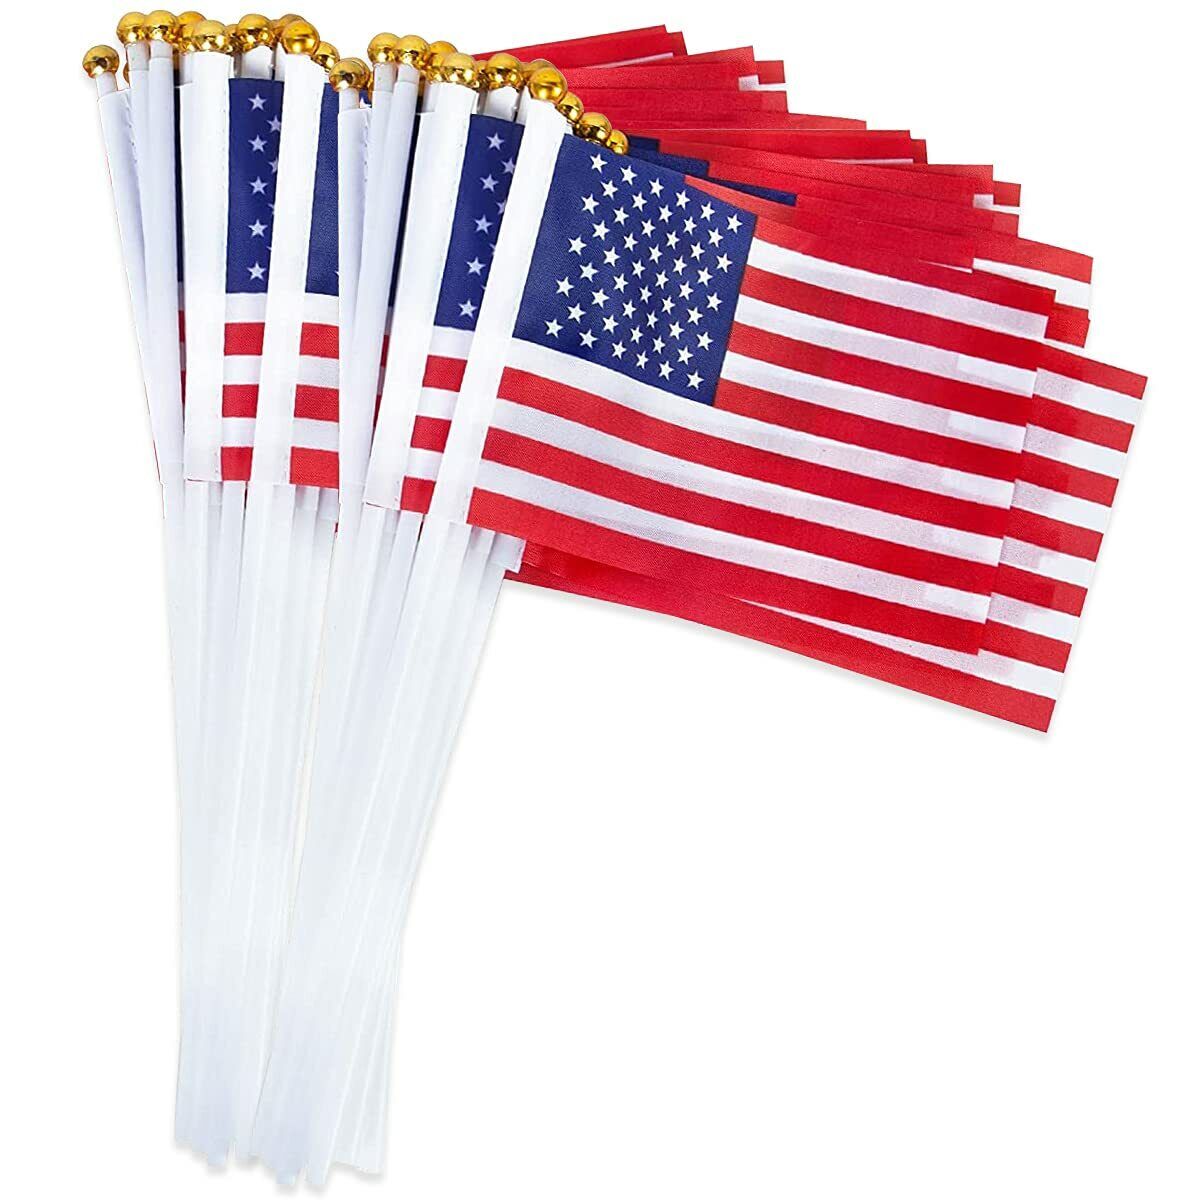 Small US Flags Mini American Flag on Stick 5" x 8" In 50Pcs Small American Flags Unbranded Does not apply - фотография #3